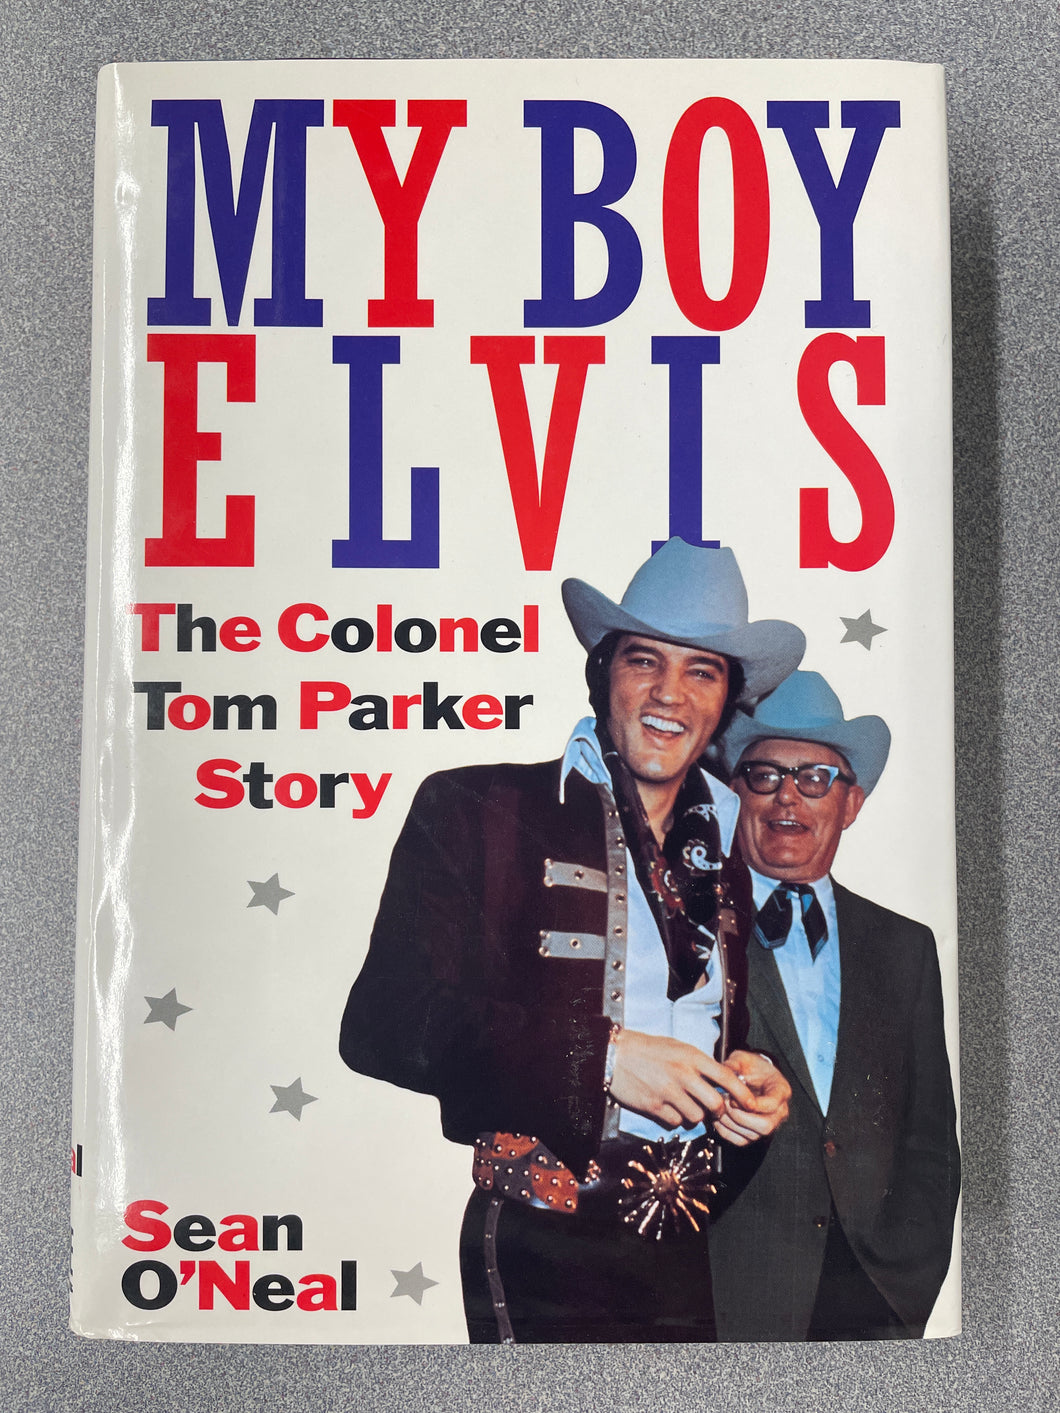 My Boy Elvis: The Colonel Tom Parker Story, O'Neal, Sean [1998] EP, 11/23